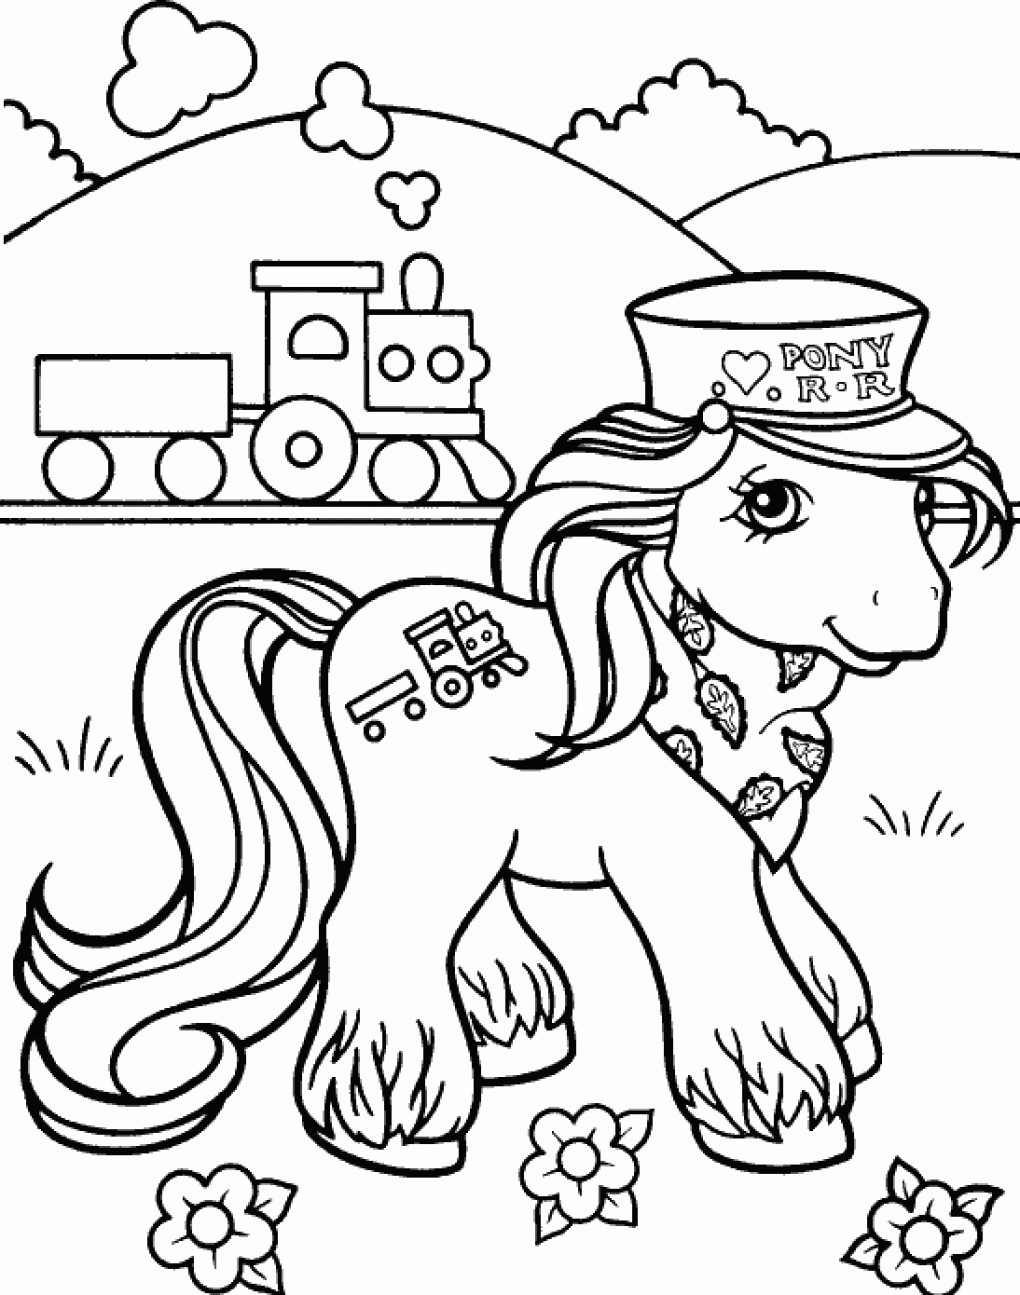 Coloring Pages For Kids My Little Pony
 FUN & LEARN Free worksheets for kid My little pony free